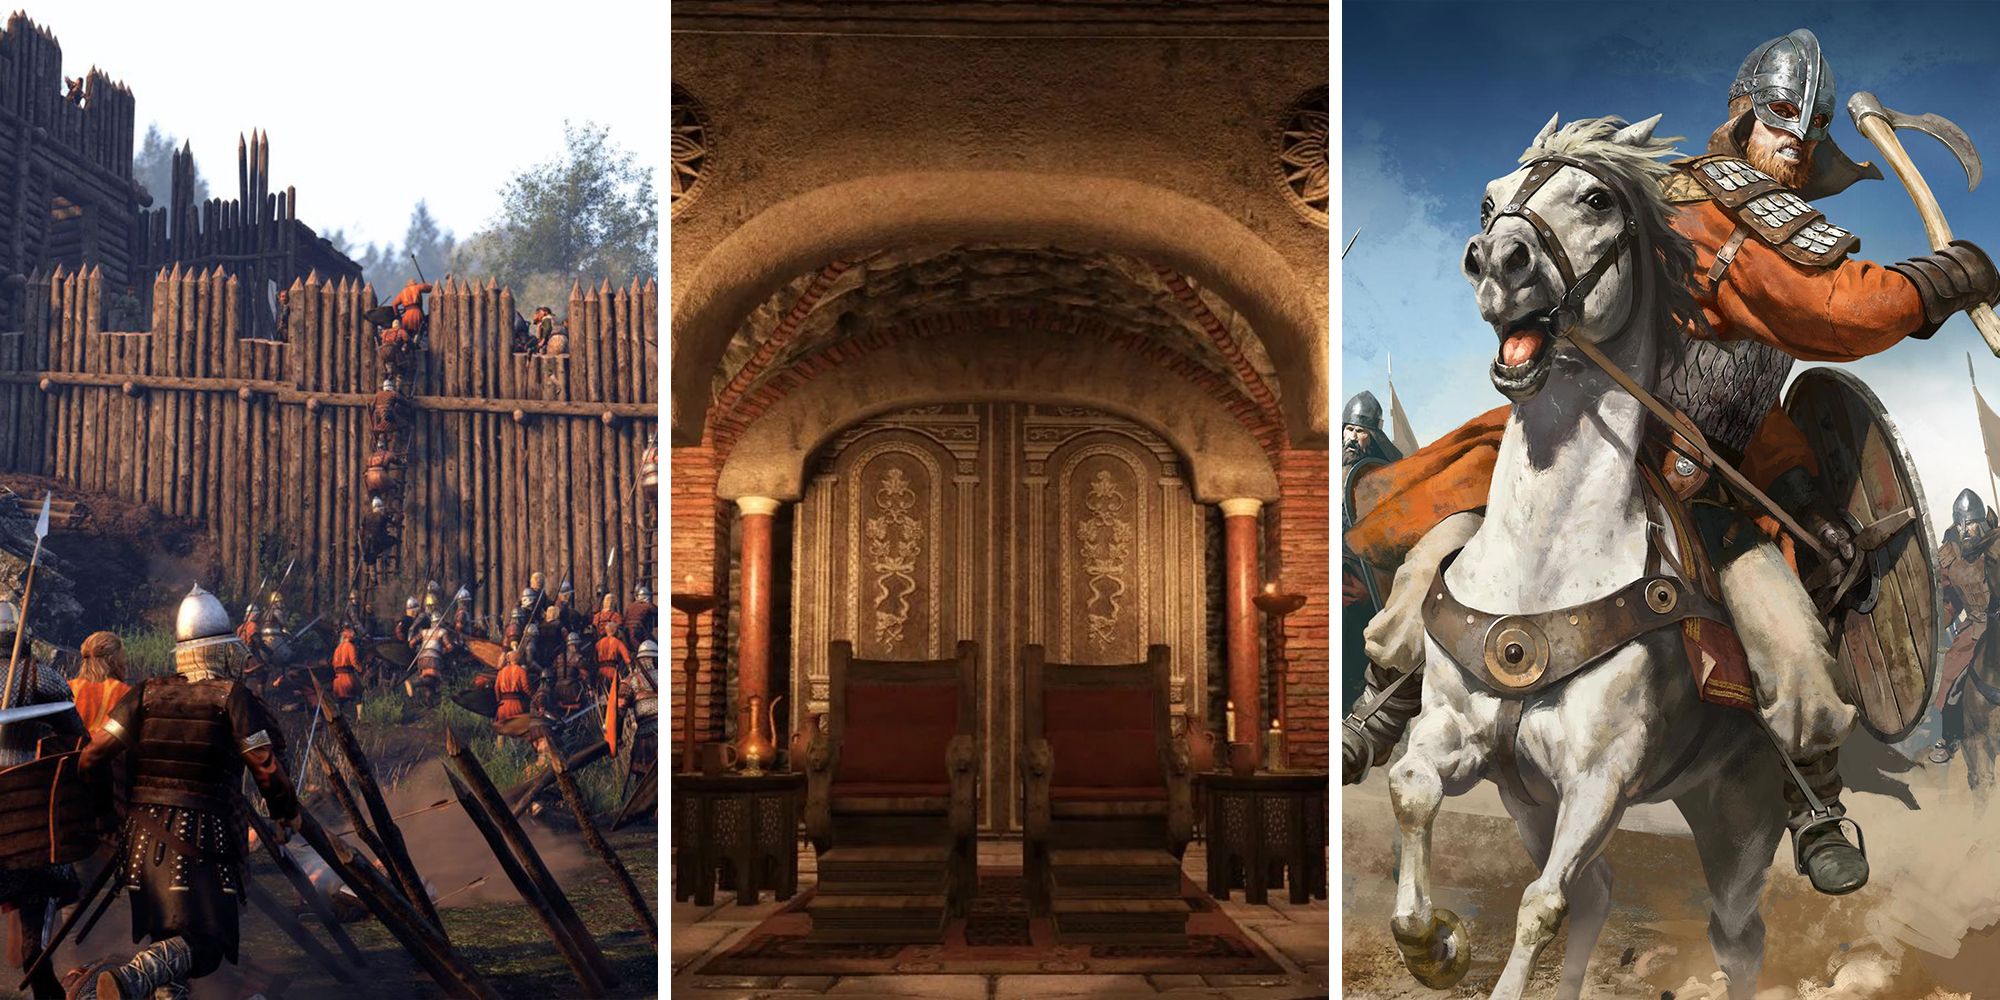 Mount & Blade 2 Bannerlord split image of a siege battle, a throne room, and a horseman